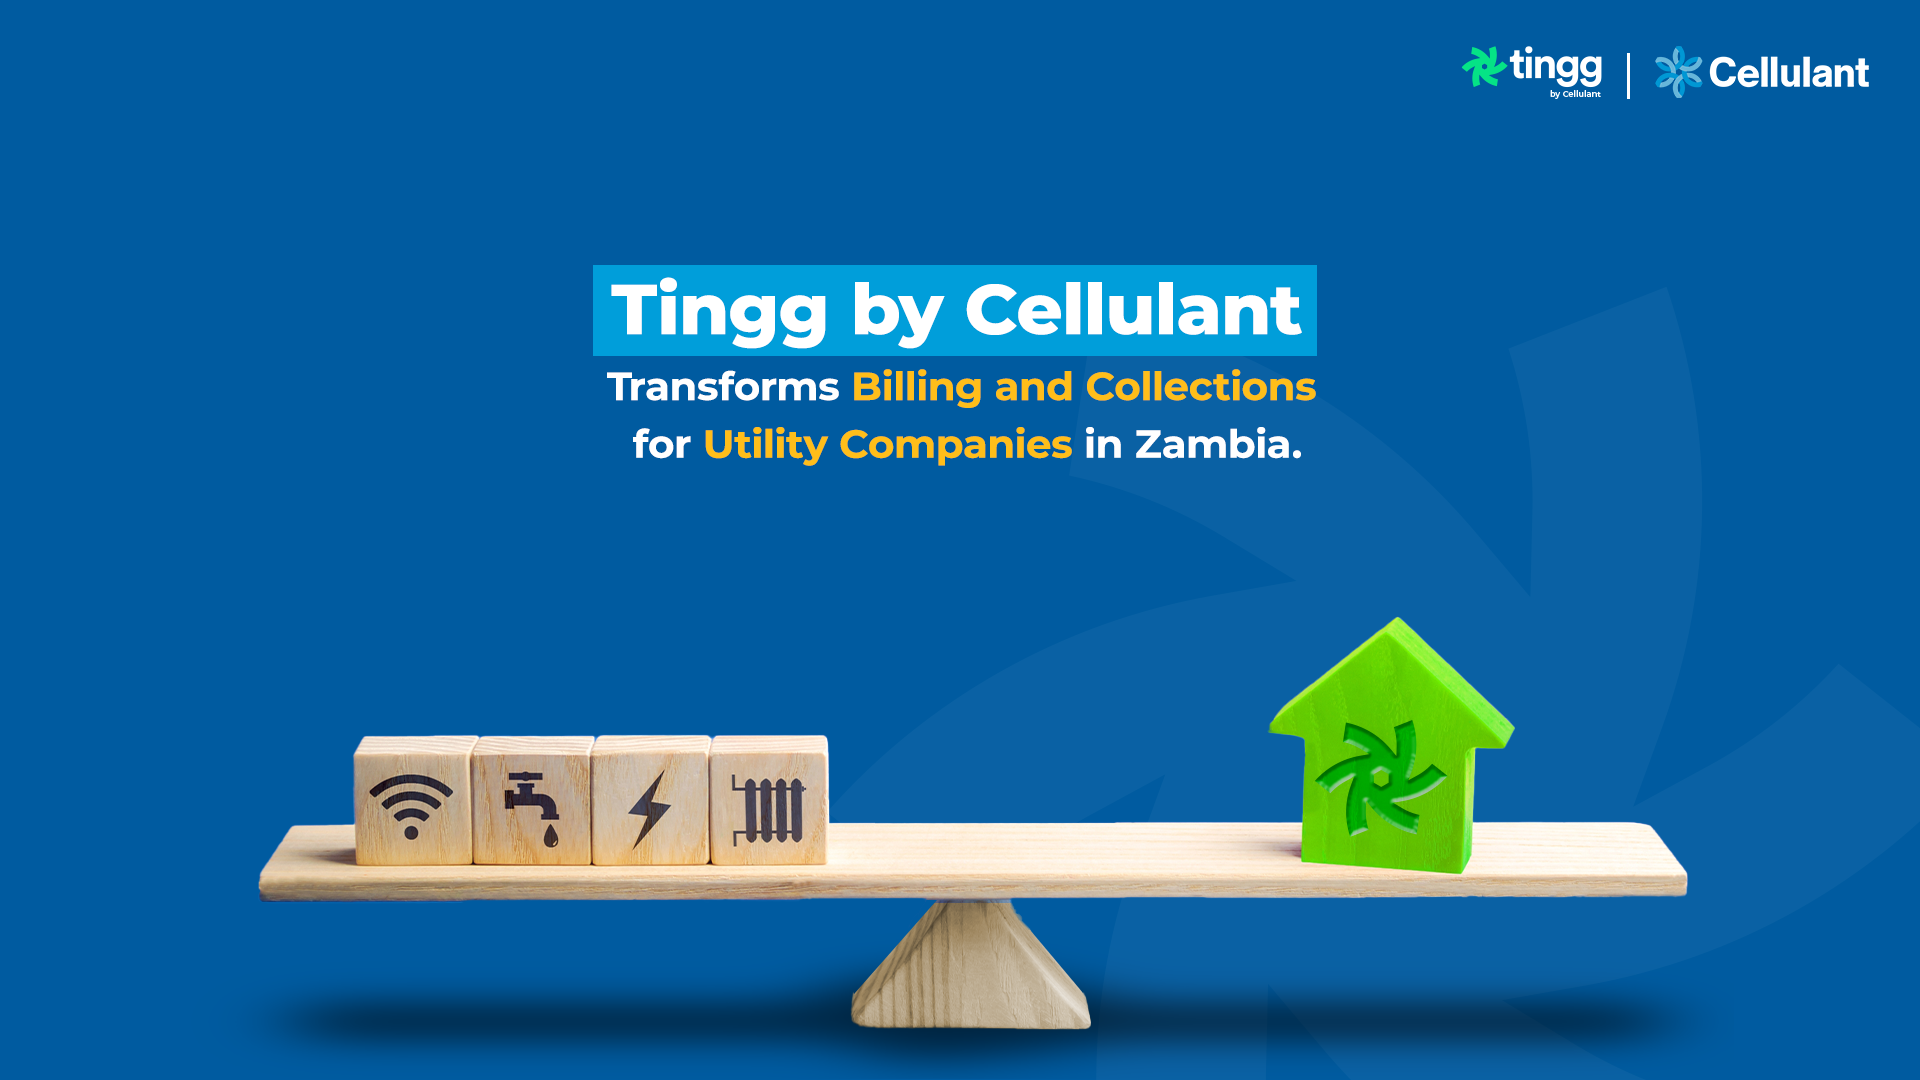 Tingg by Cellulant Transforms Billing and Collections for Utility Companies in Zambia.